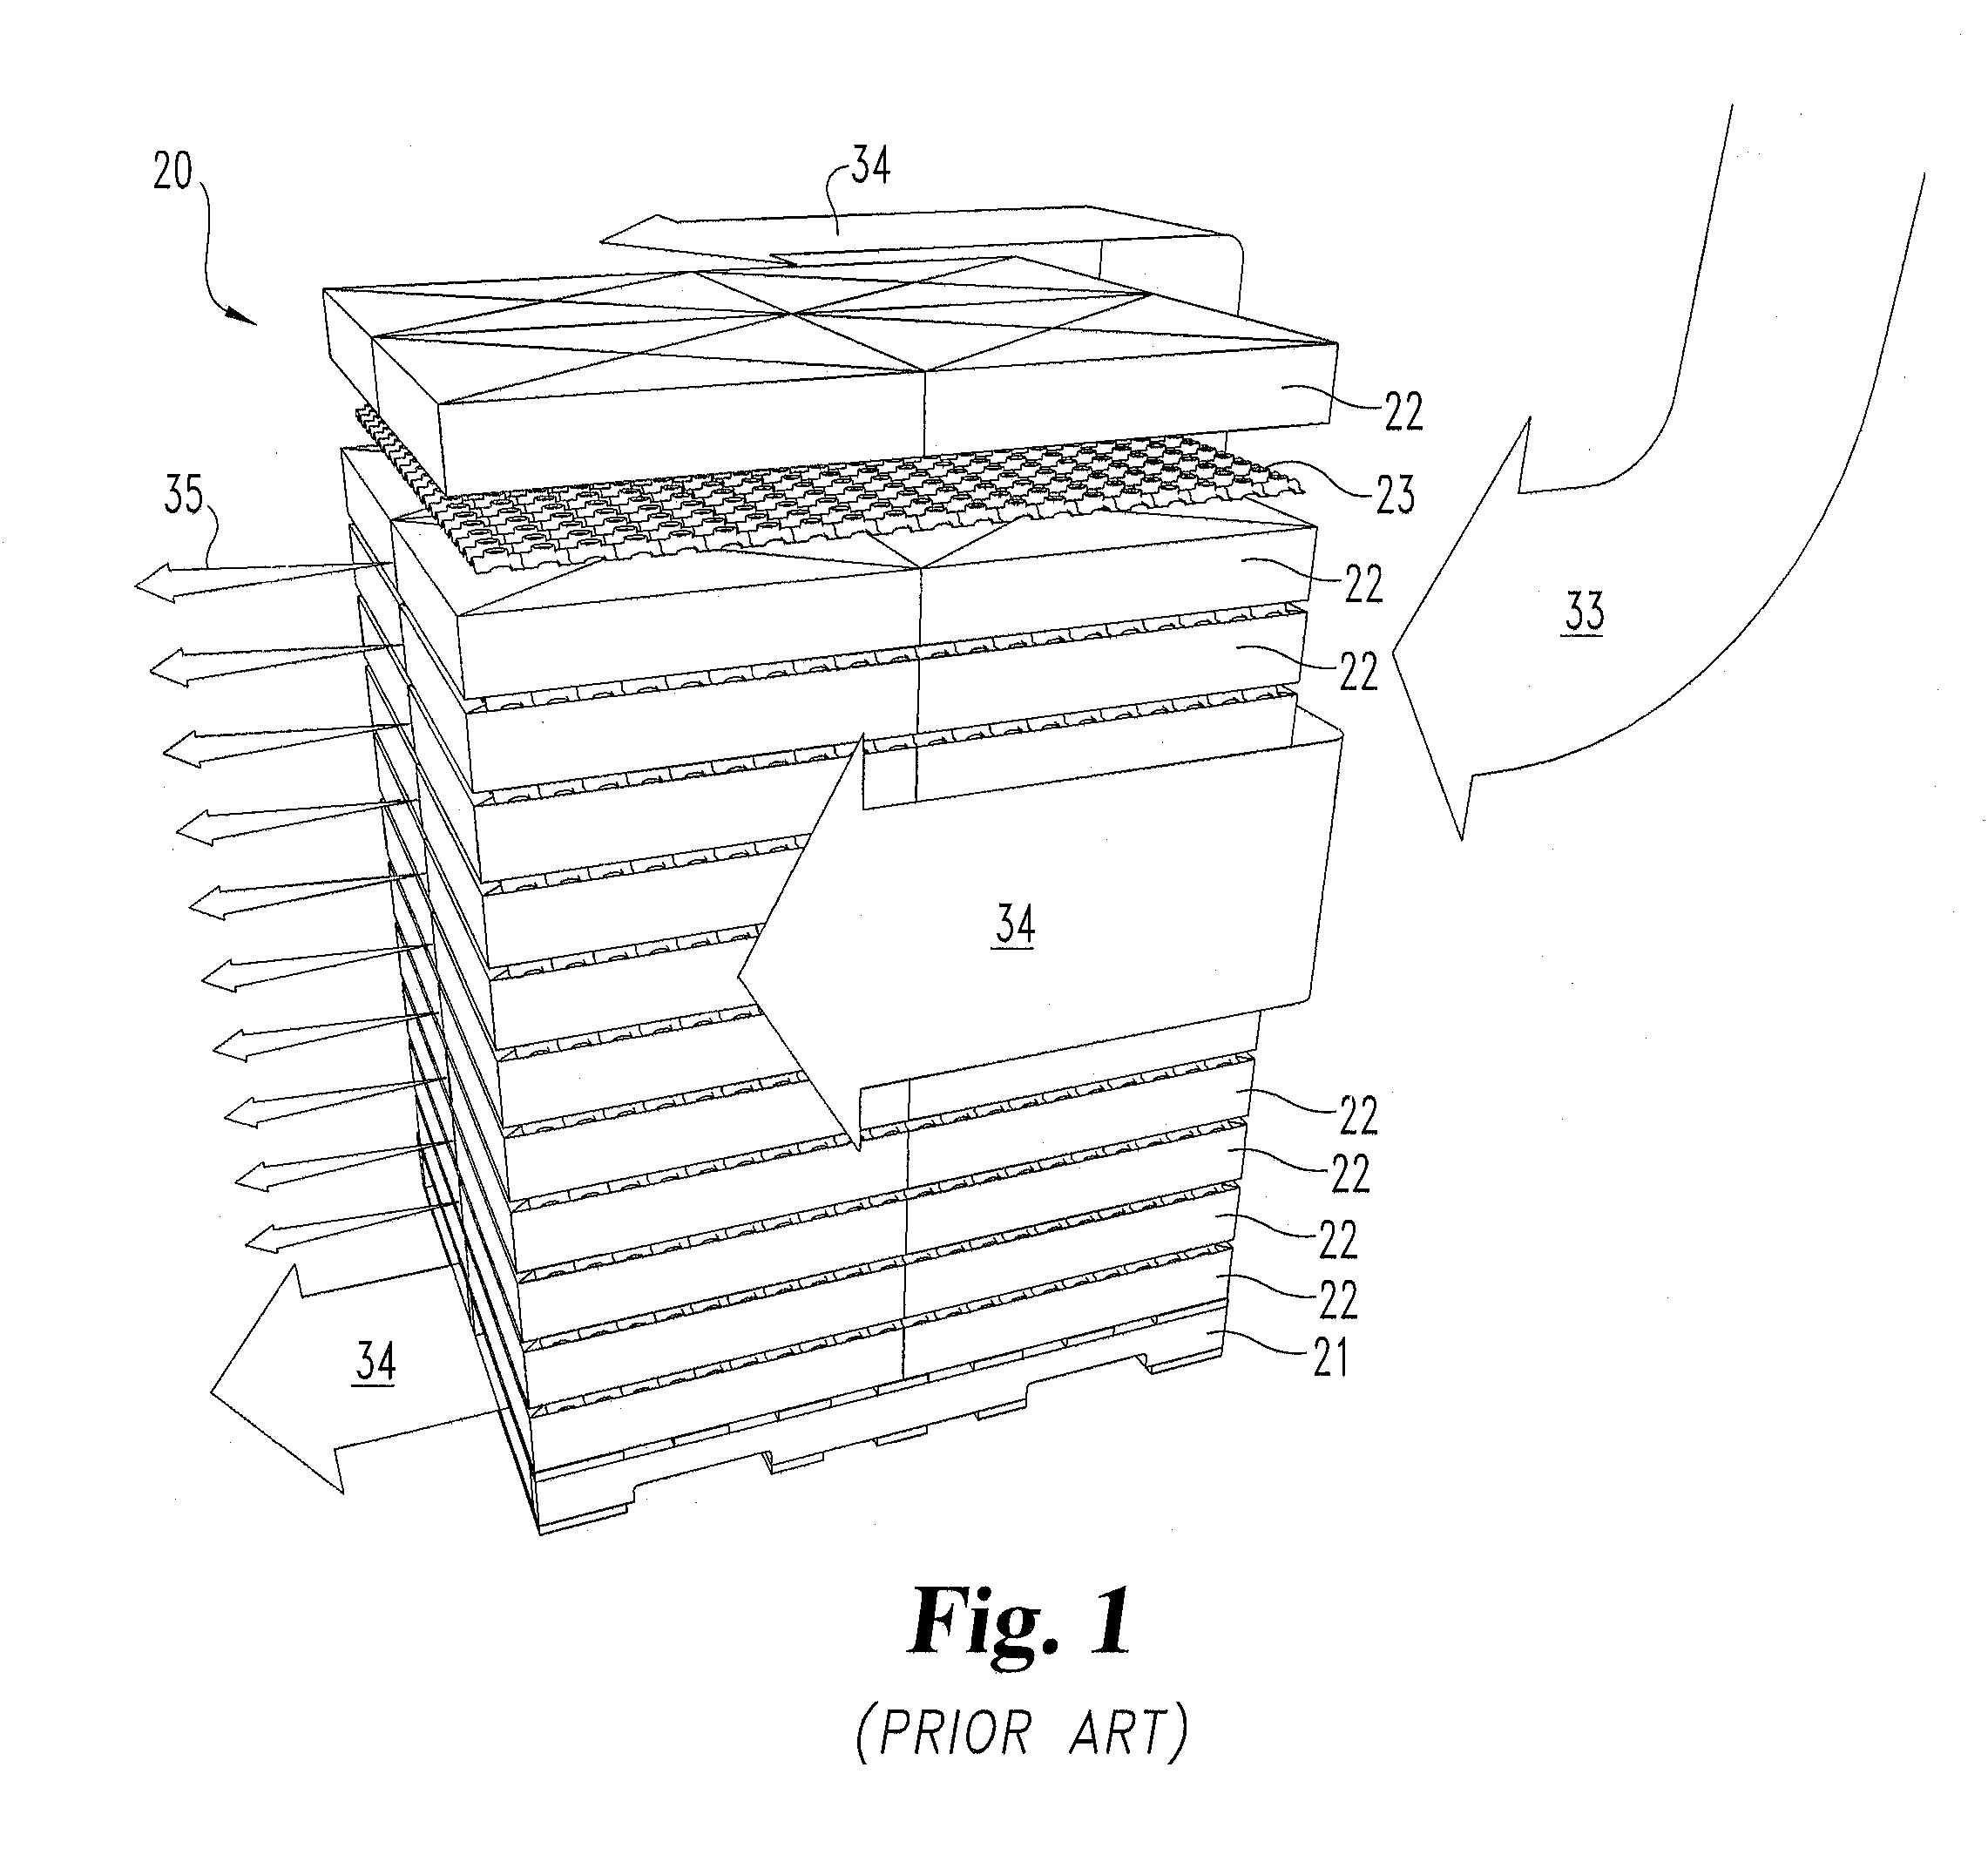 Apparatus for blast freezing palletized product